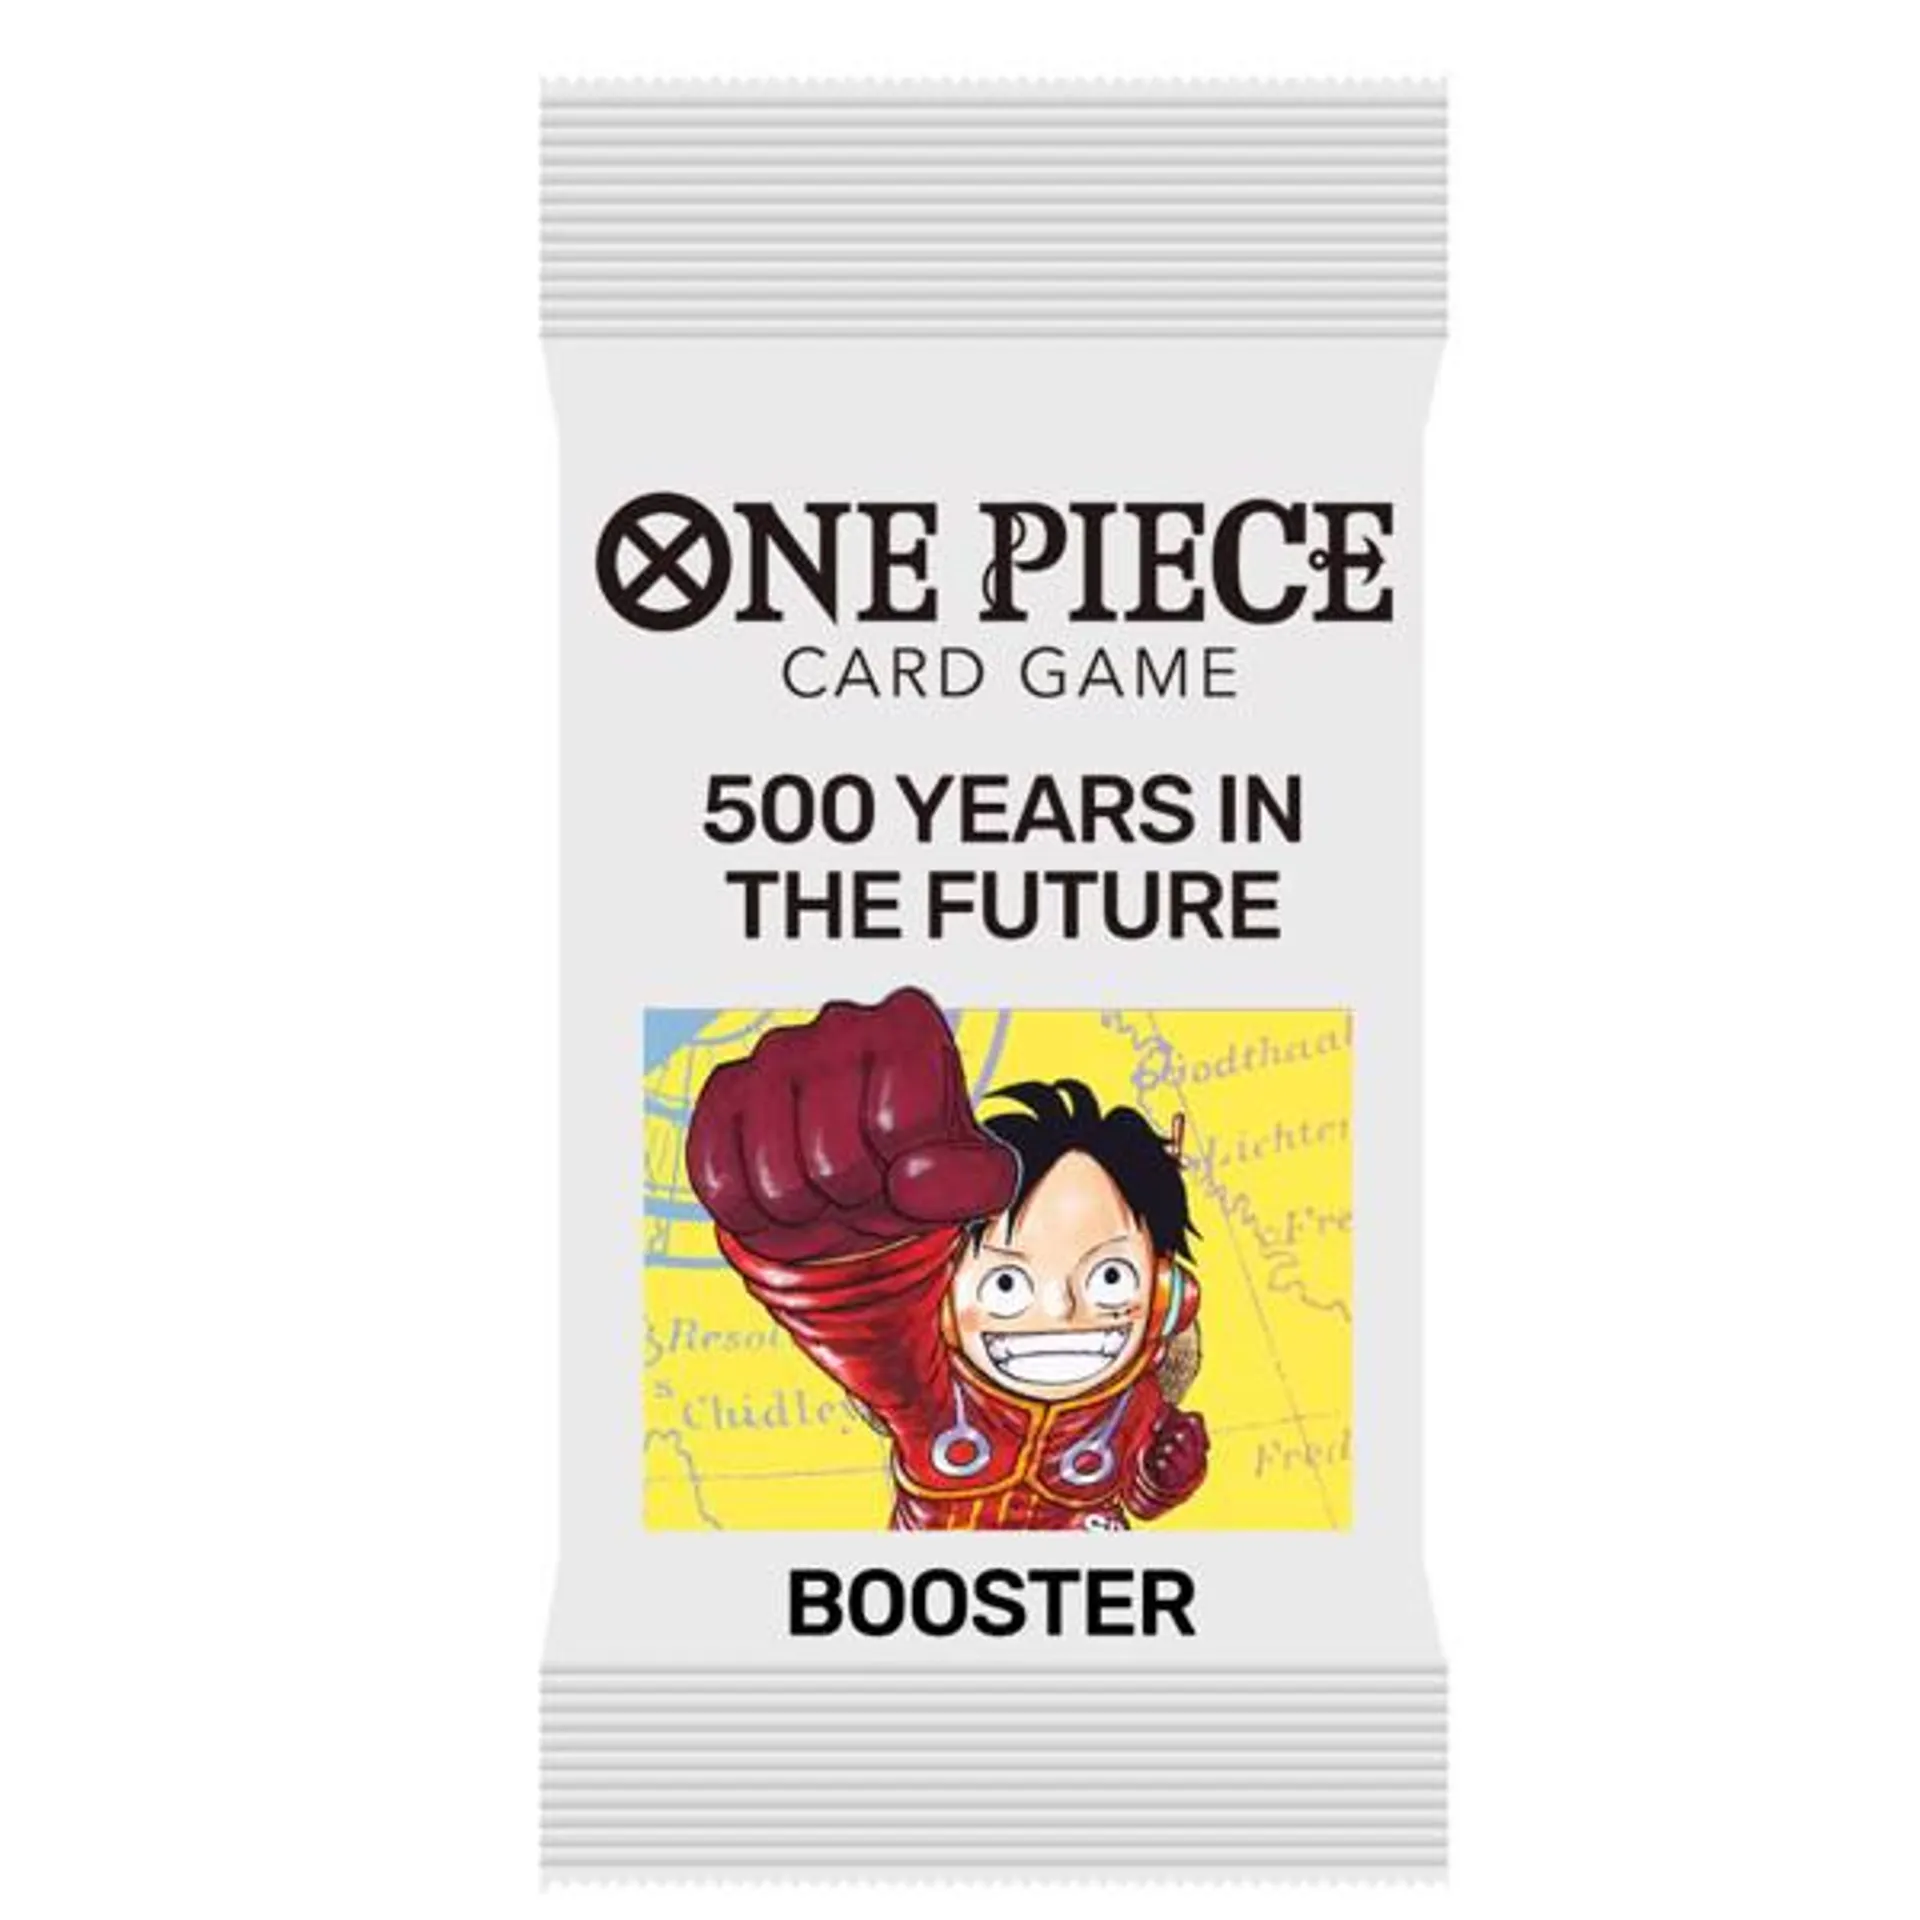 One Piece Card Game - 500 Years in the Future Booster Pack OP-07